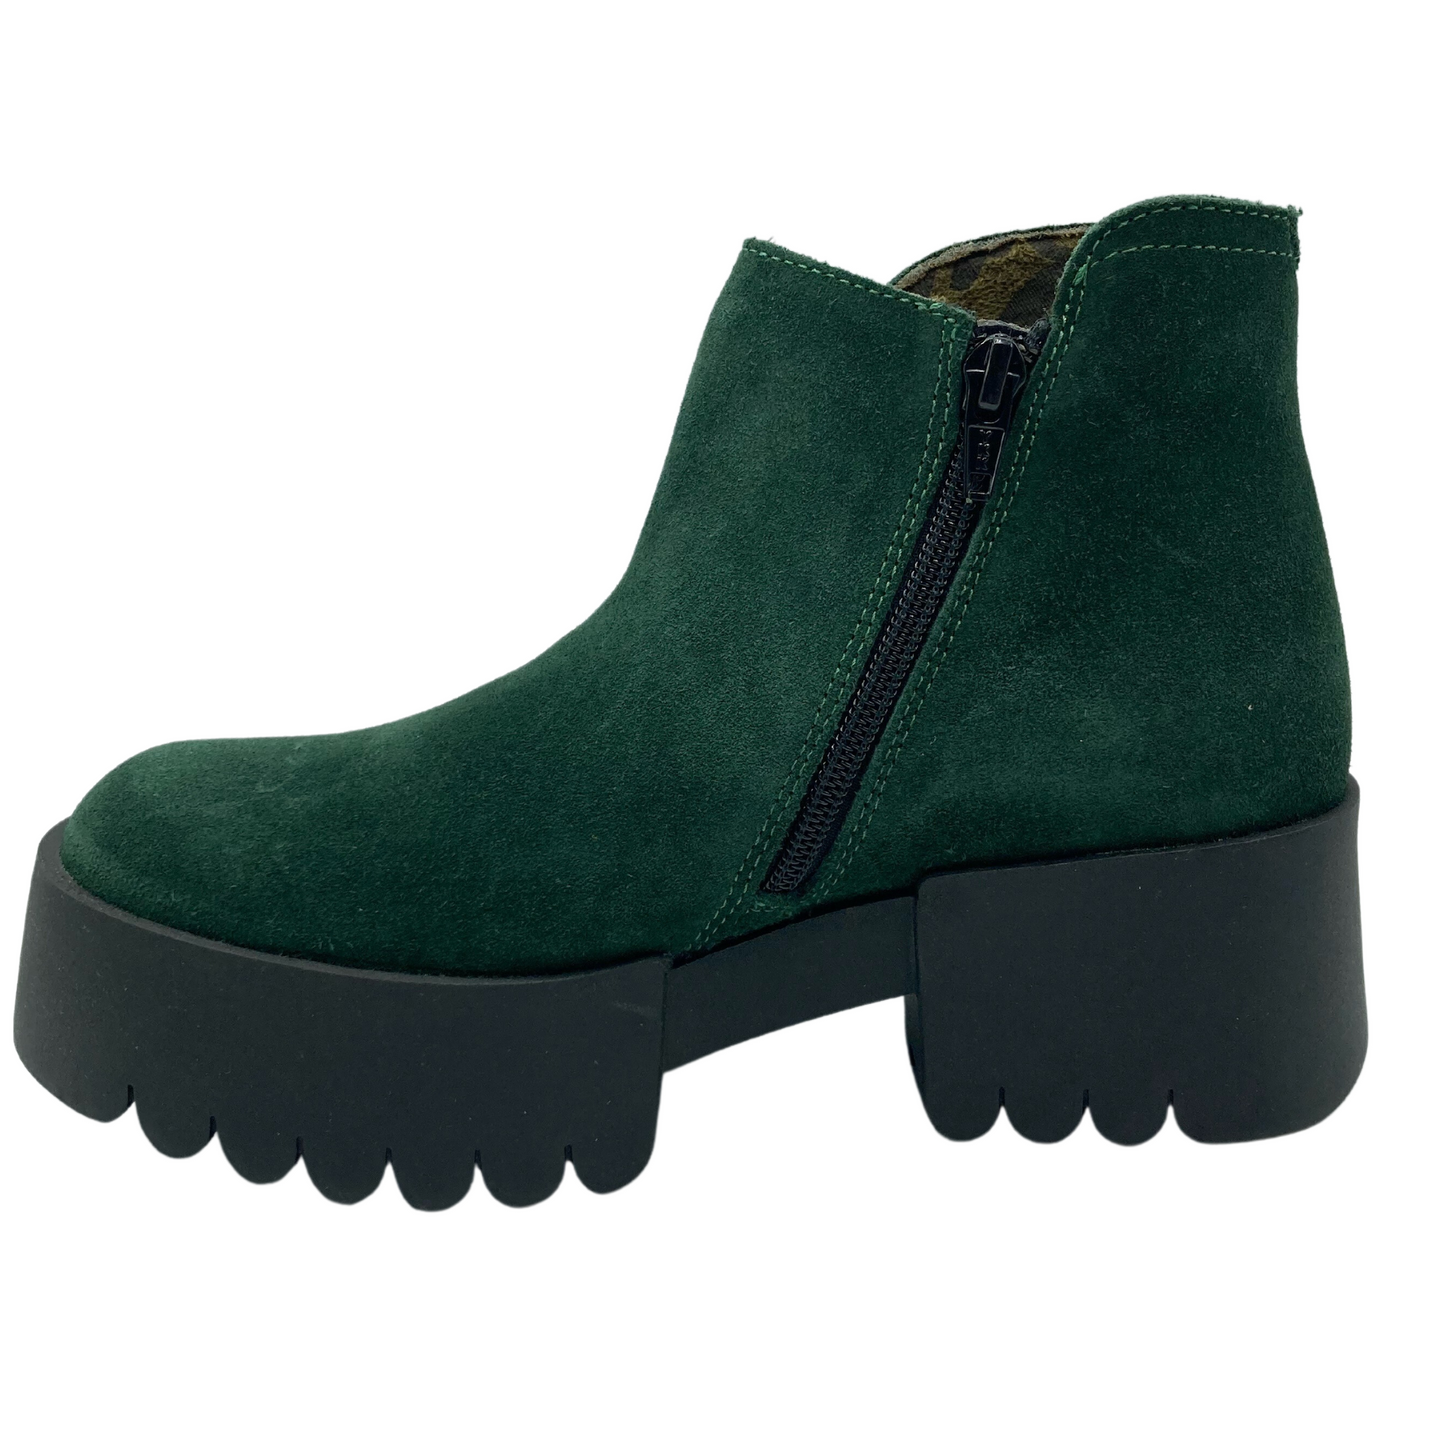 Left facing view of green suede ankle boot with black rubber chunky heel and zipper closure